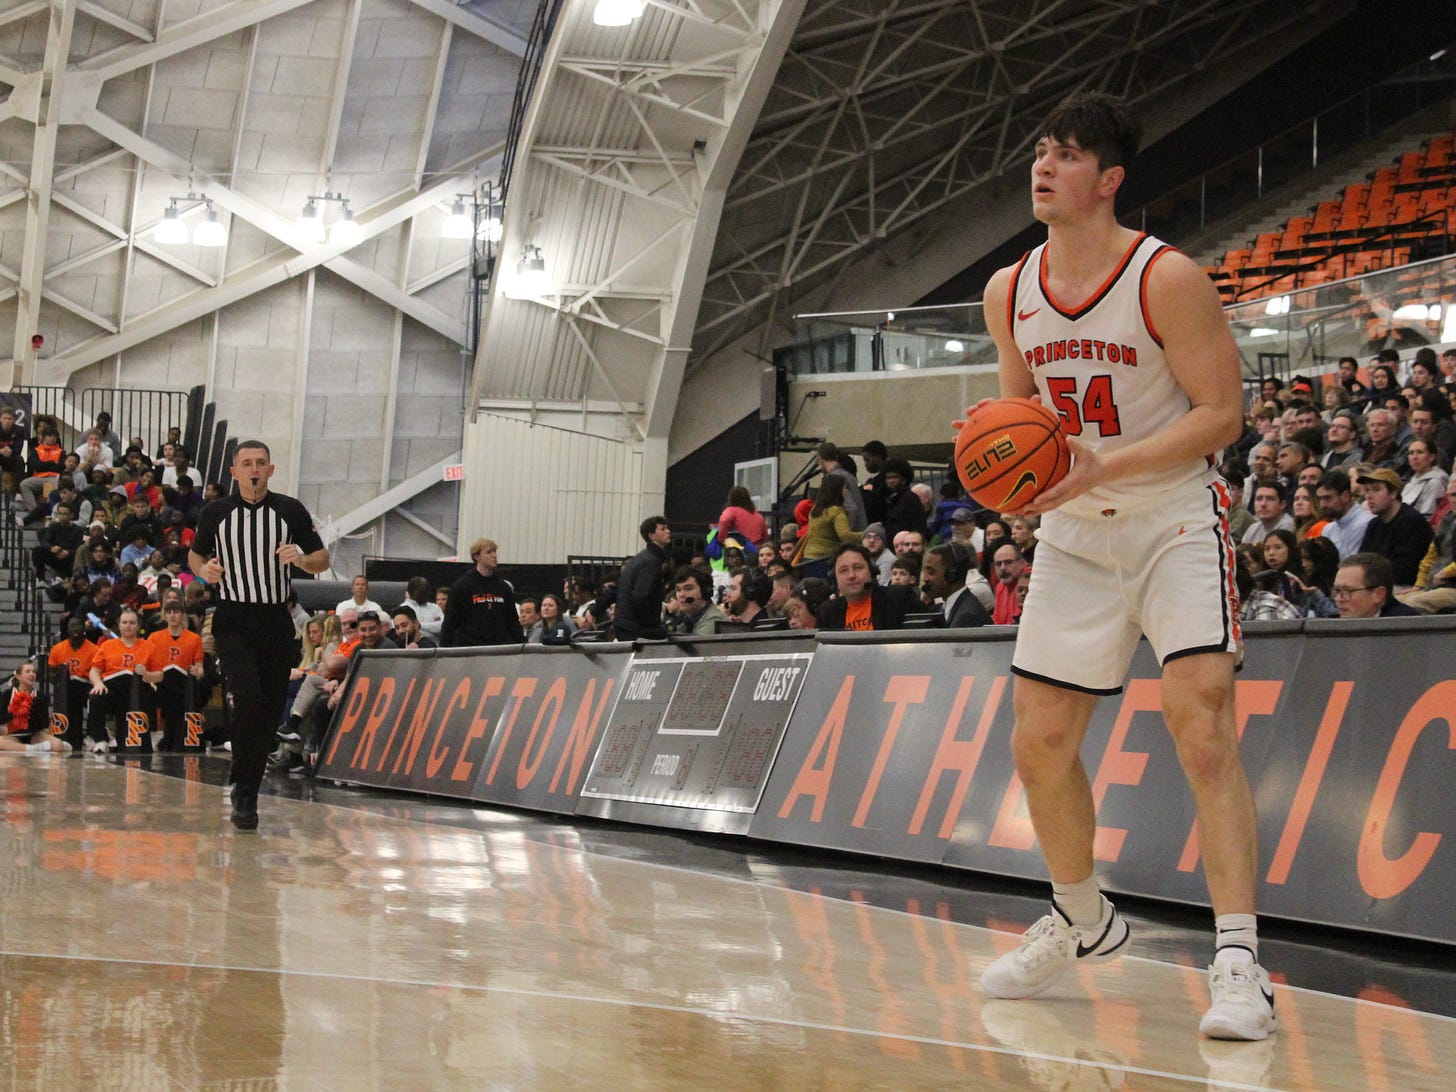 Princeton’s Zach Martini prepares to shoot during a game against Furman on Dec. 2, 2023. (Photo by Adam Zielonka)